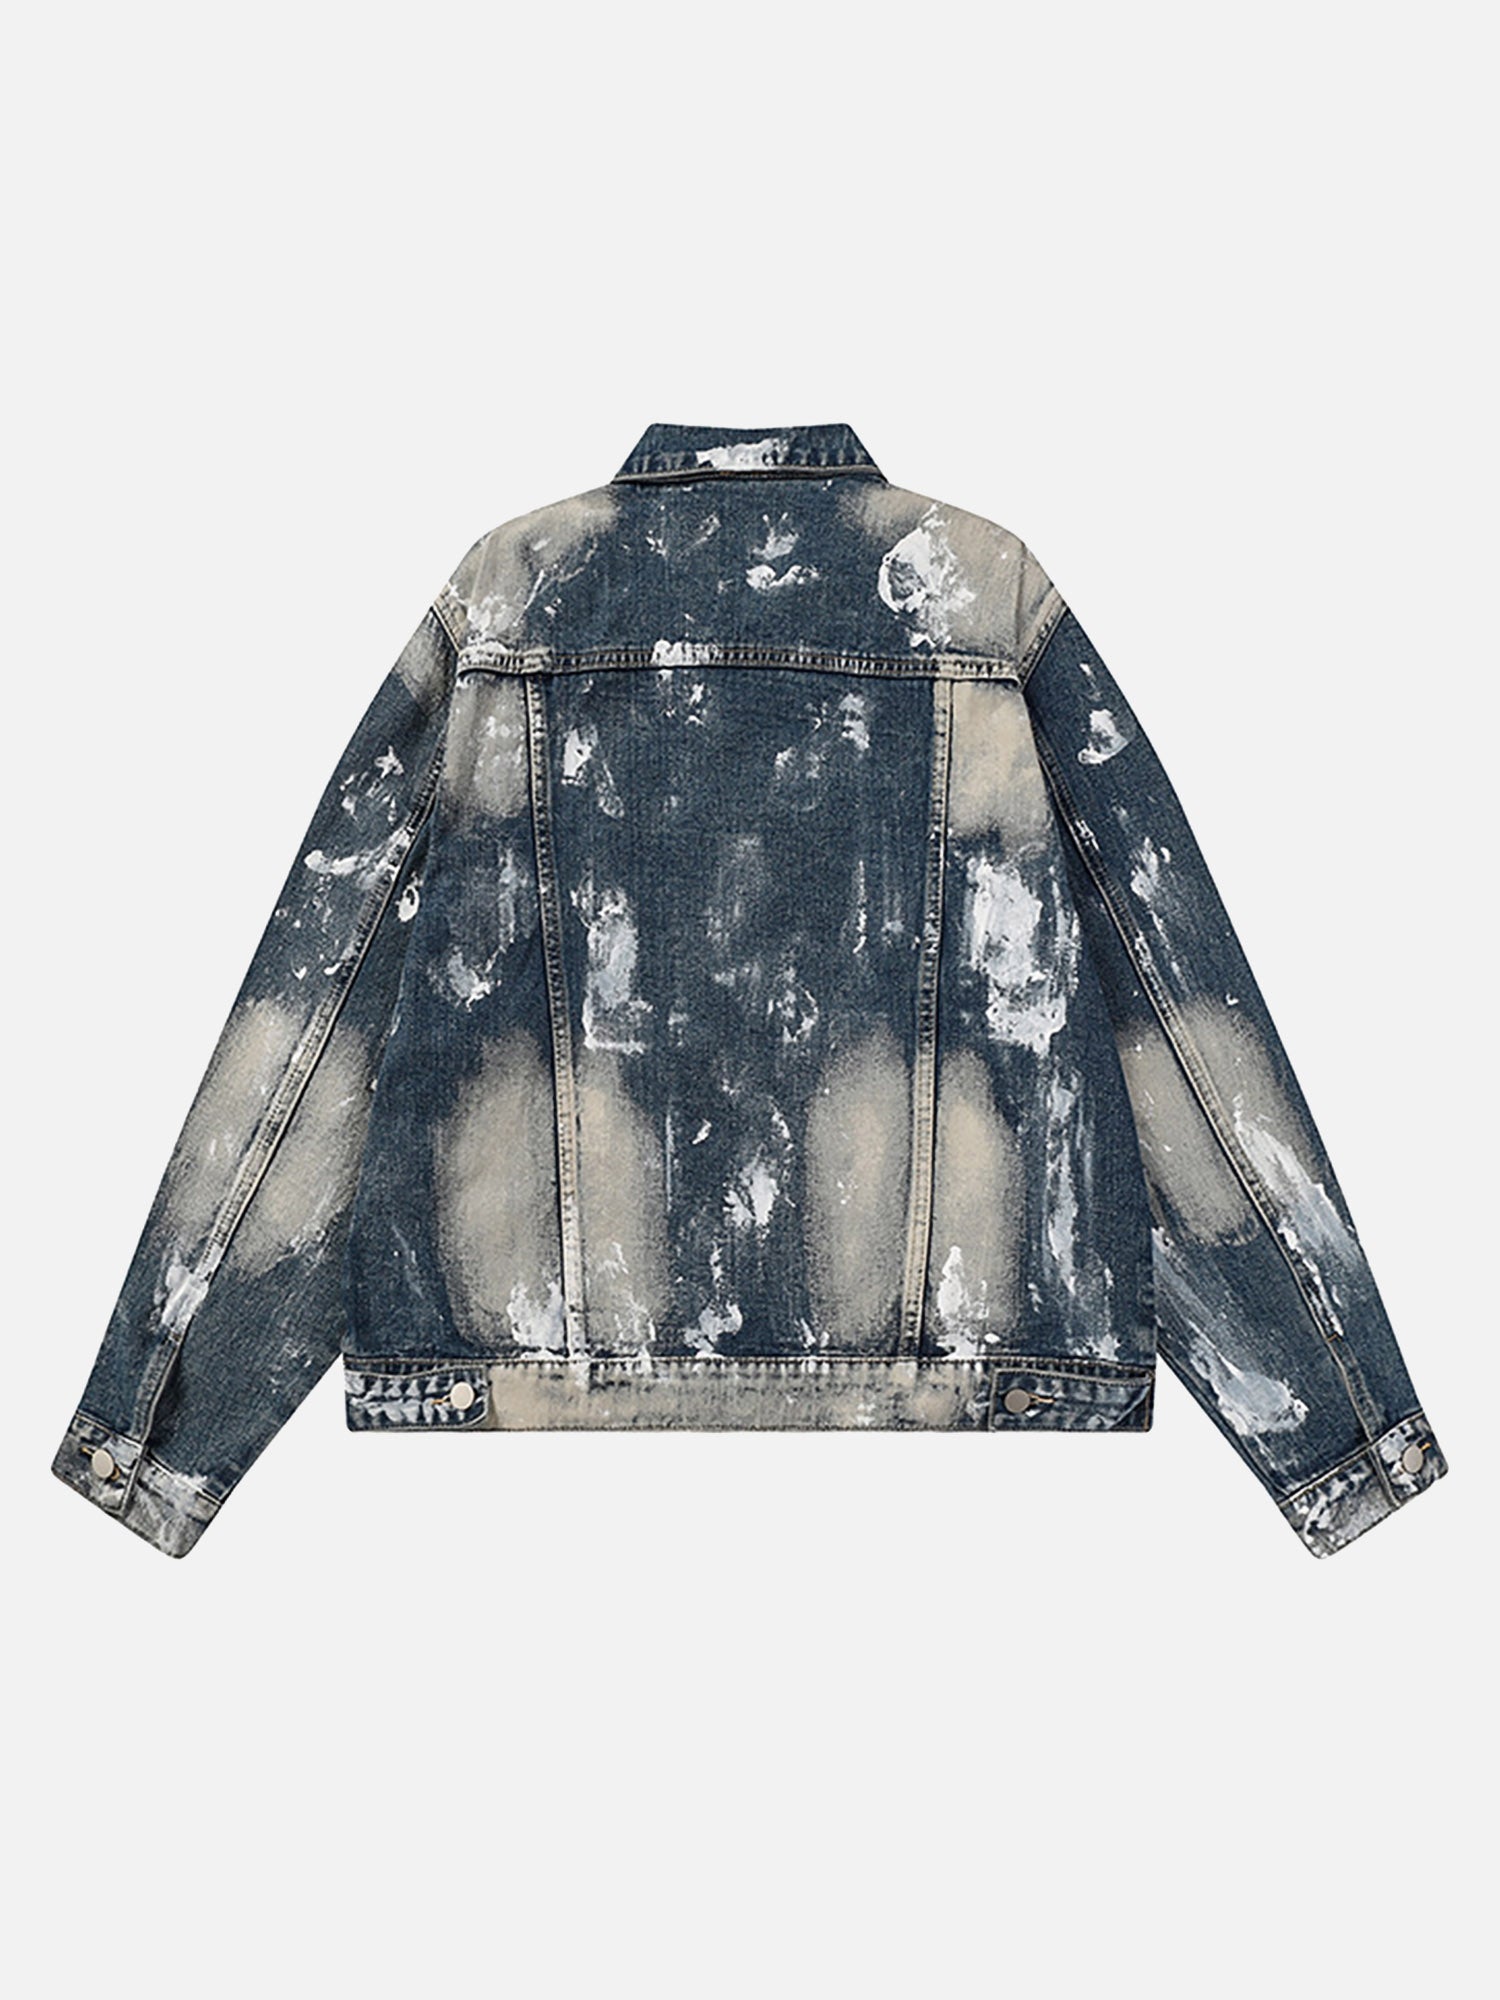 Thesupermade American Street Fashion Heavy Industry Washed Contrast Denim Jacket